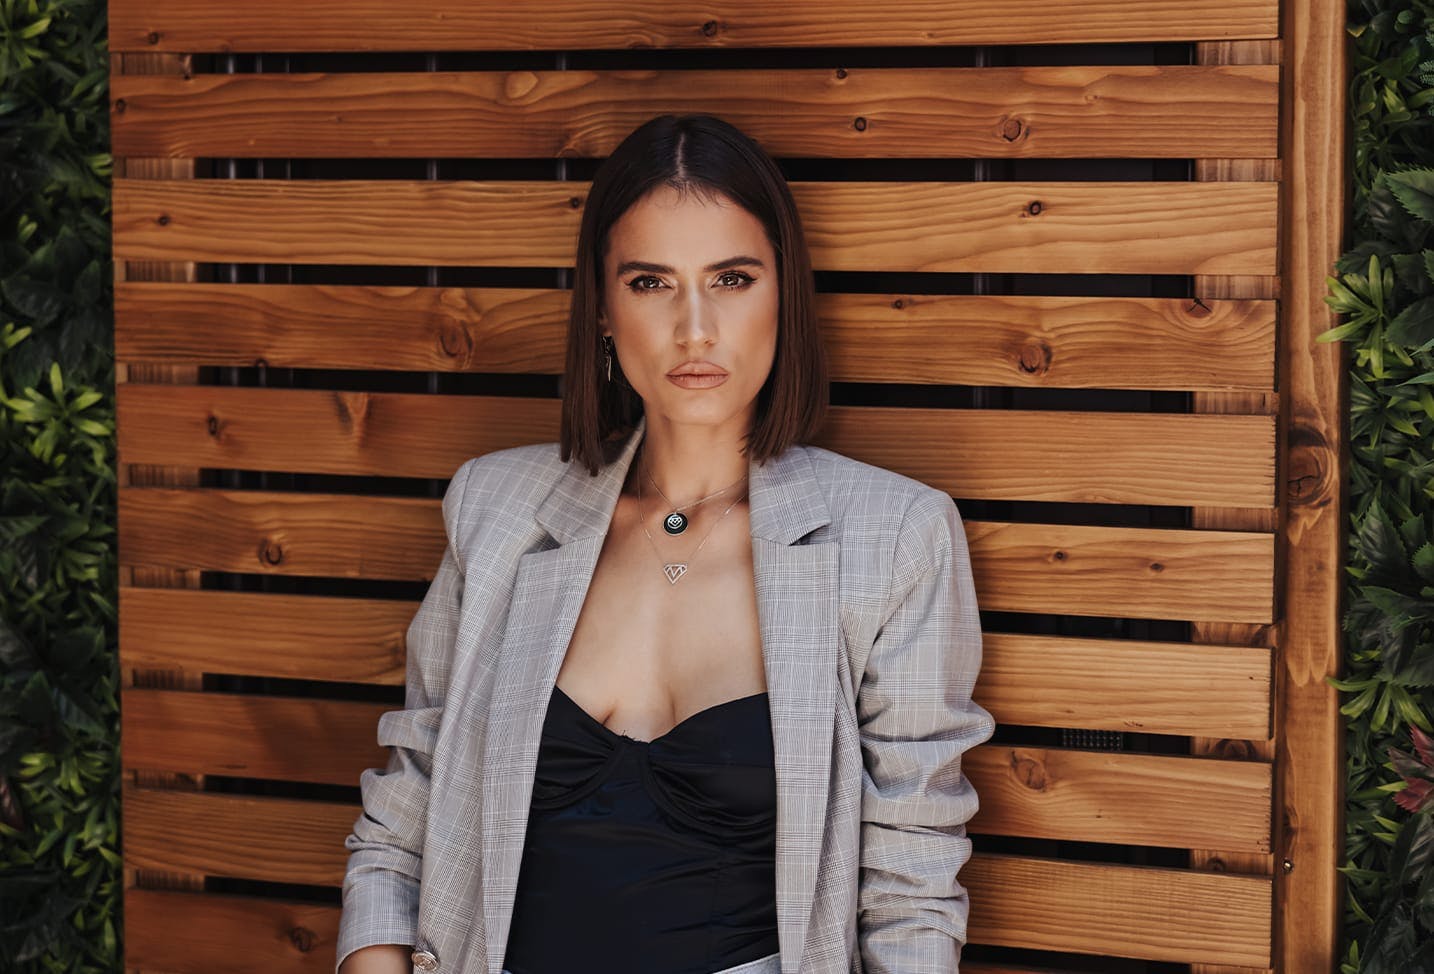 a woman with short dark brunette hair leaning against a wooden fence, wearing a grey blazer and black top